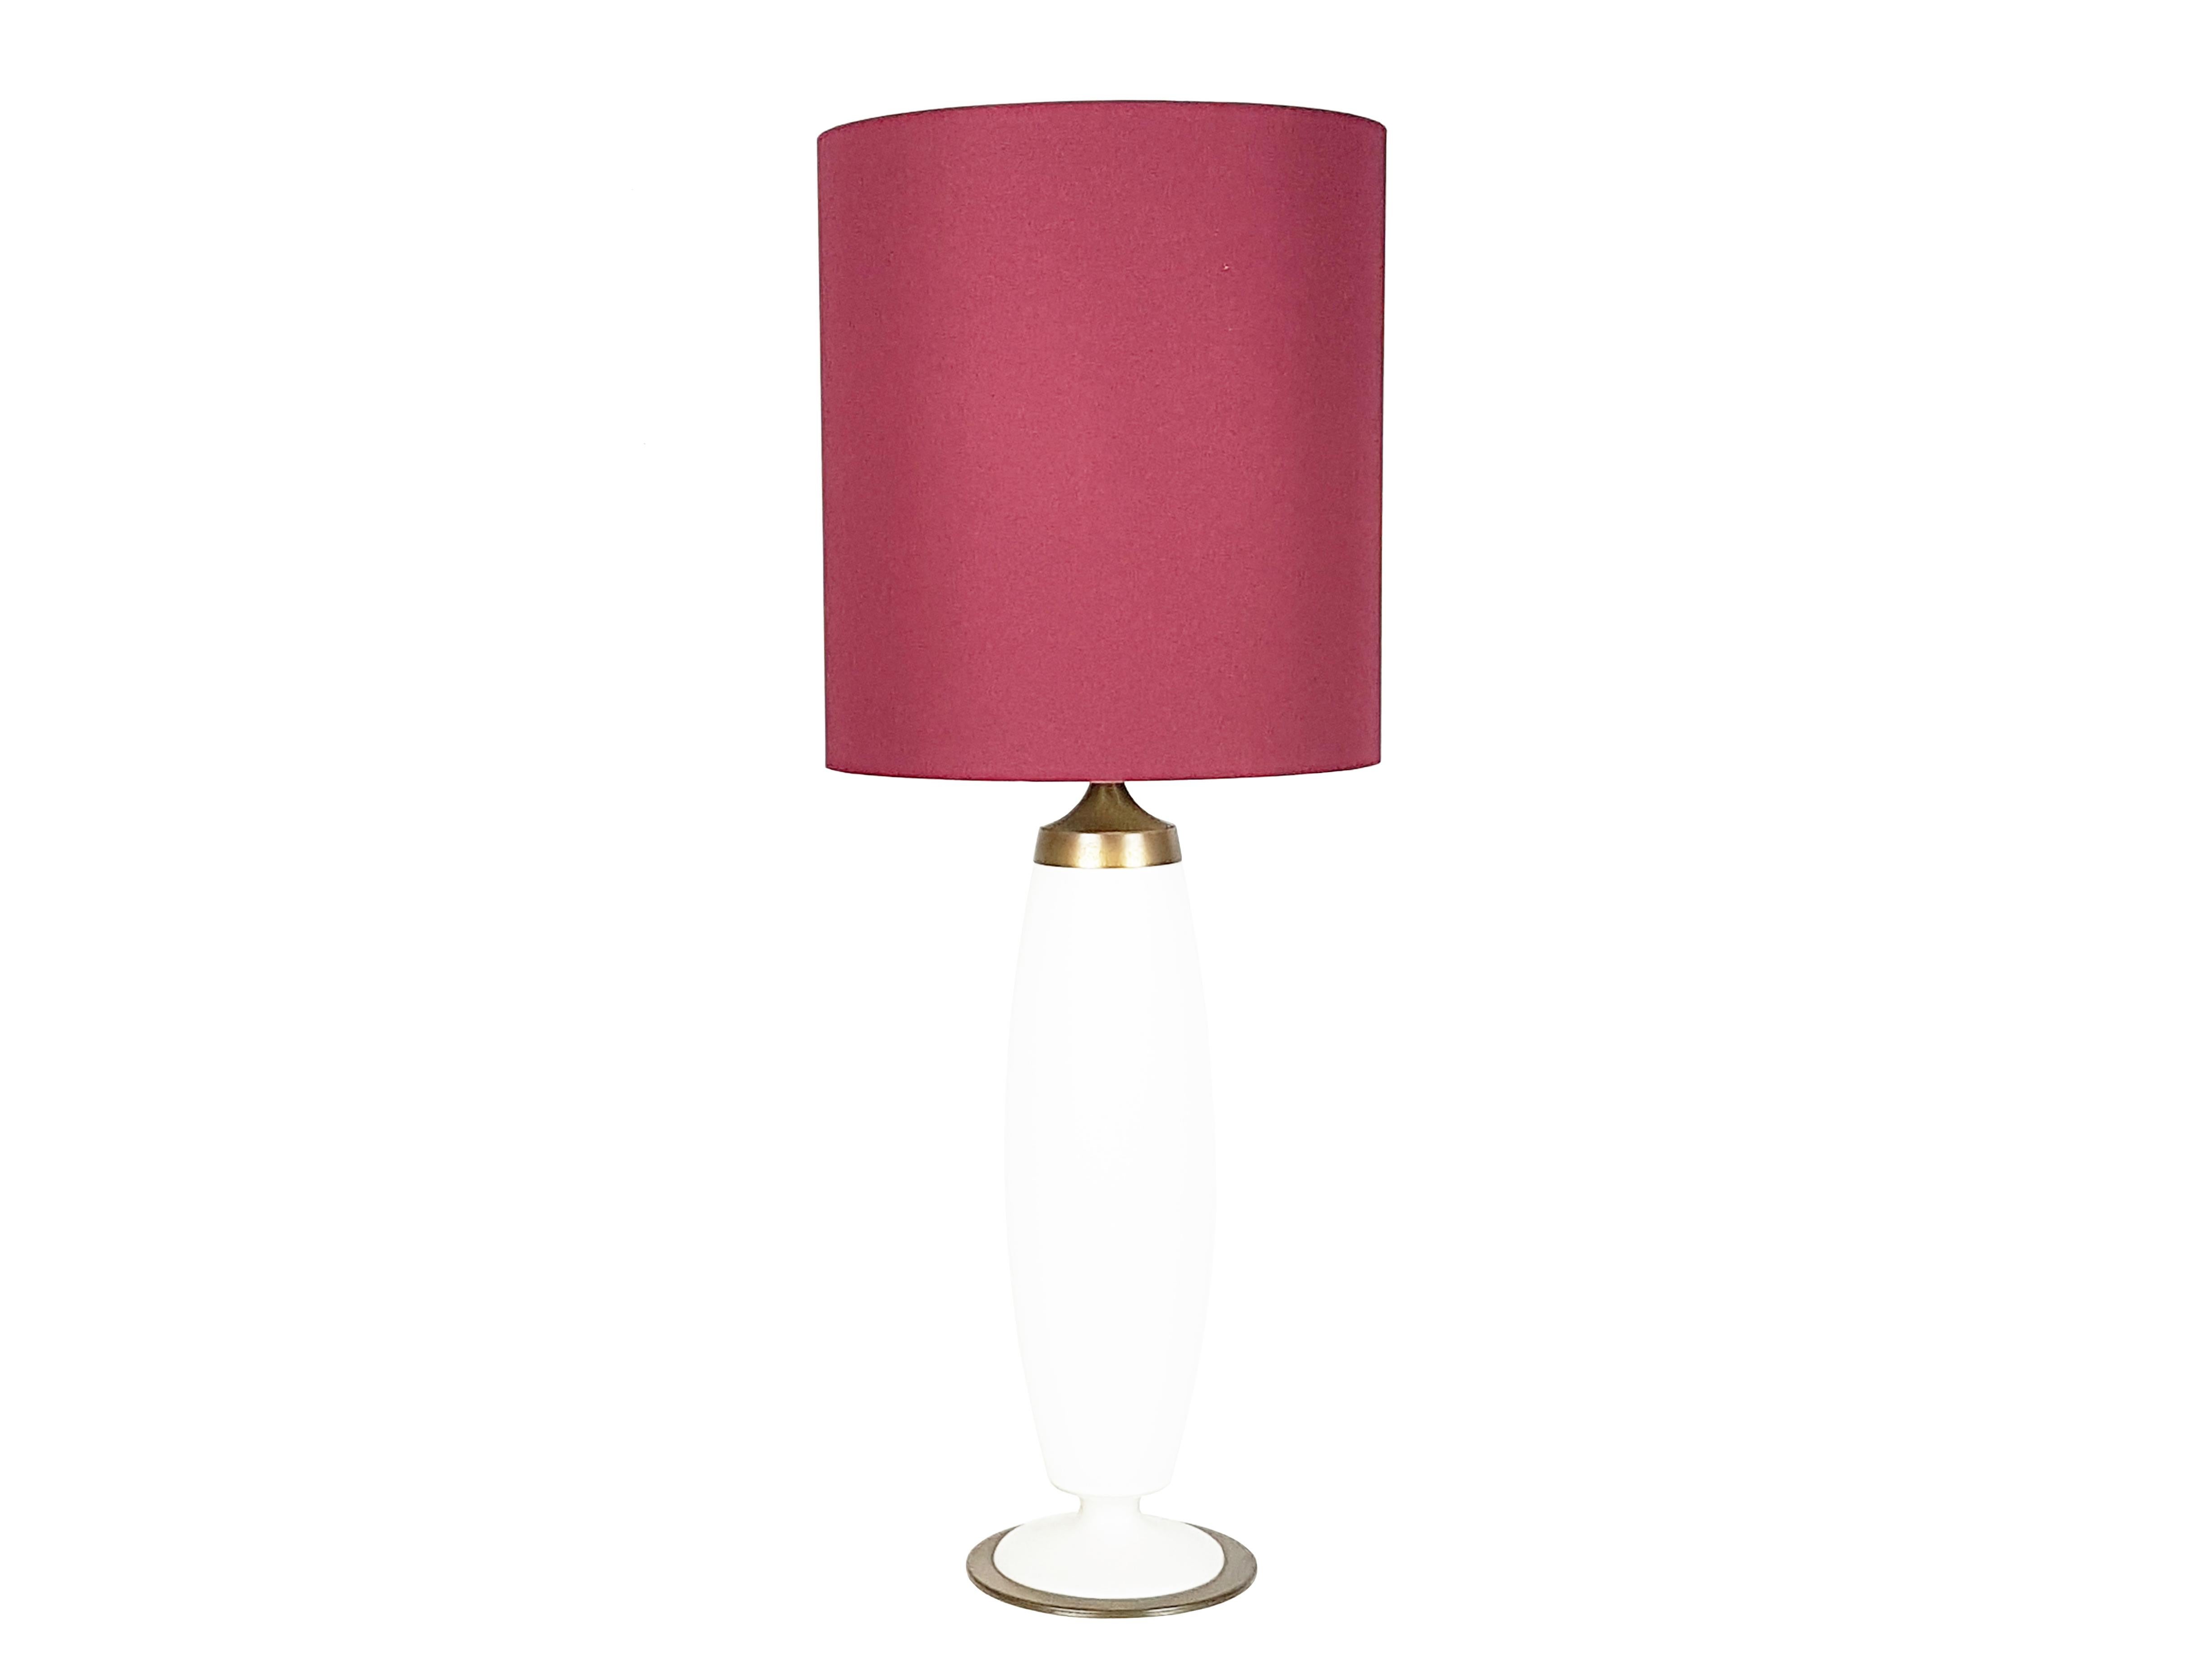 This fine table lamp is made of opaline satin finish glass with brass details and it remains in very good conditions: some paint losses on the lamp holder, as showed in picture. Available in bordeaux shade version.